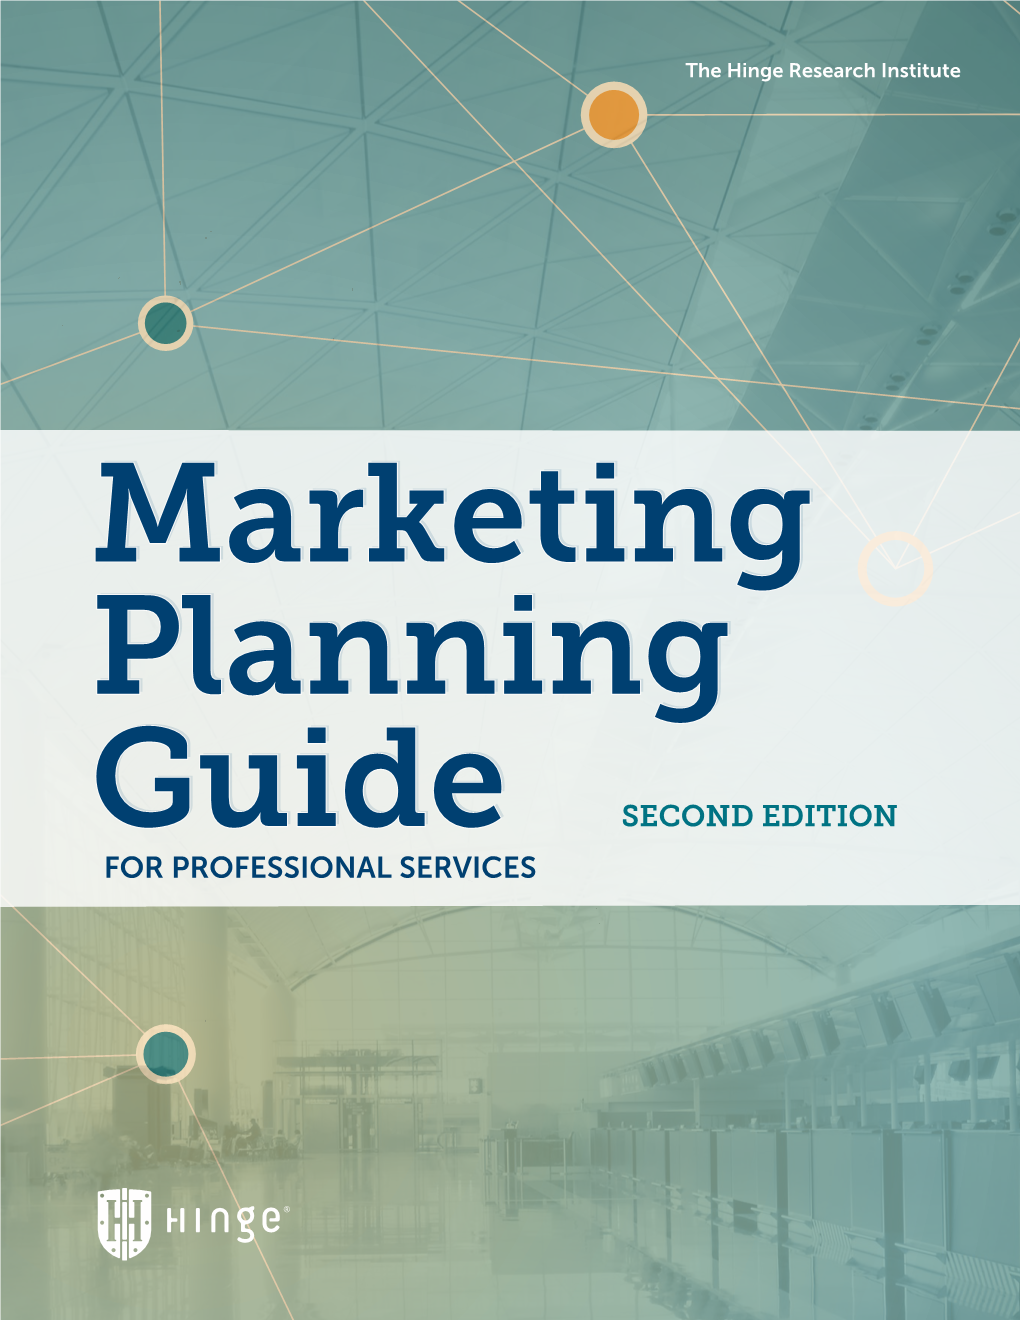 Marketing Planning Guide for Professional Services Firms Copyright © 2013